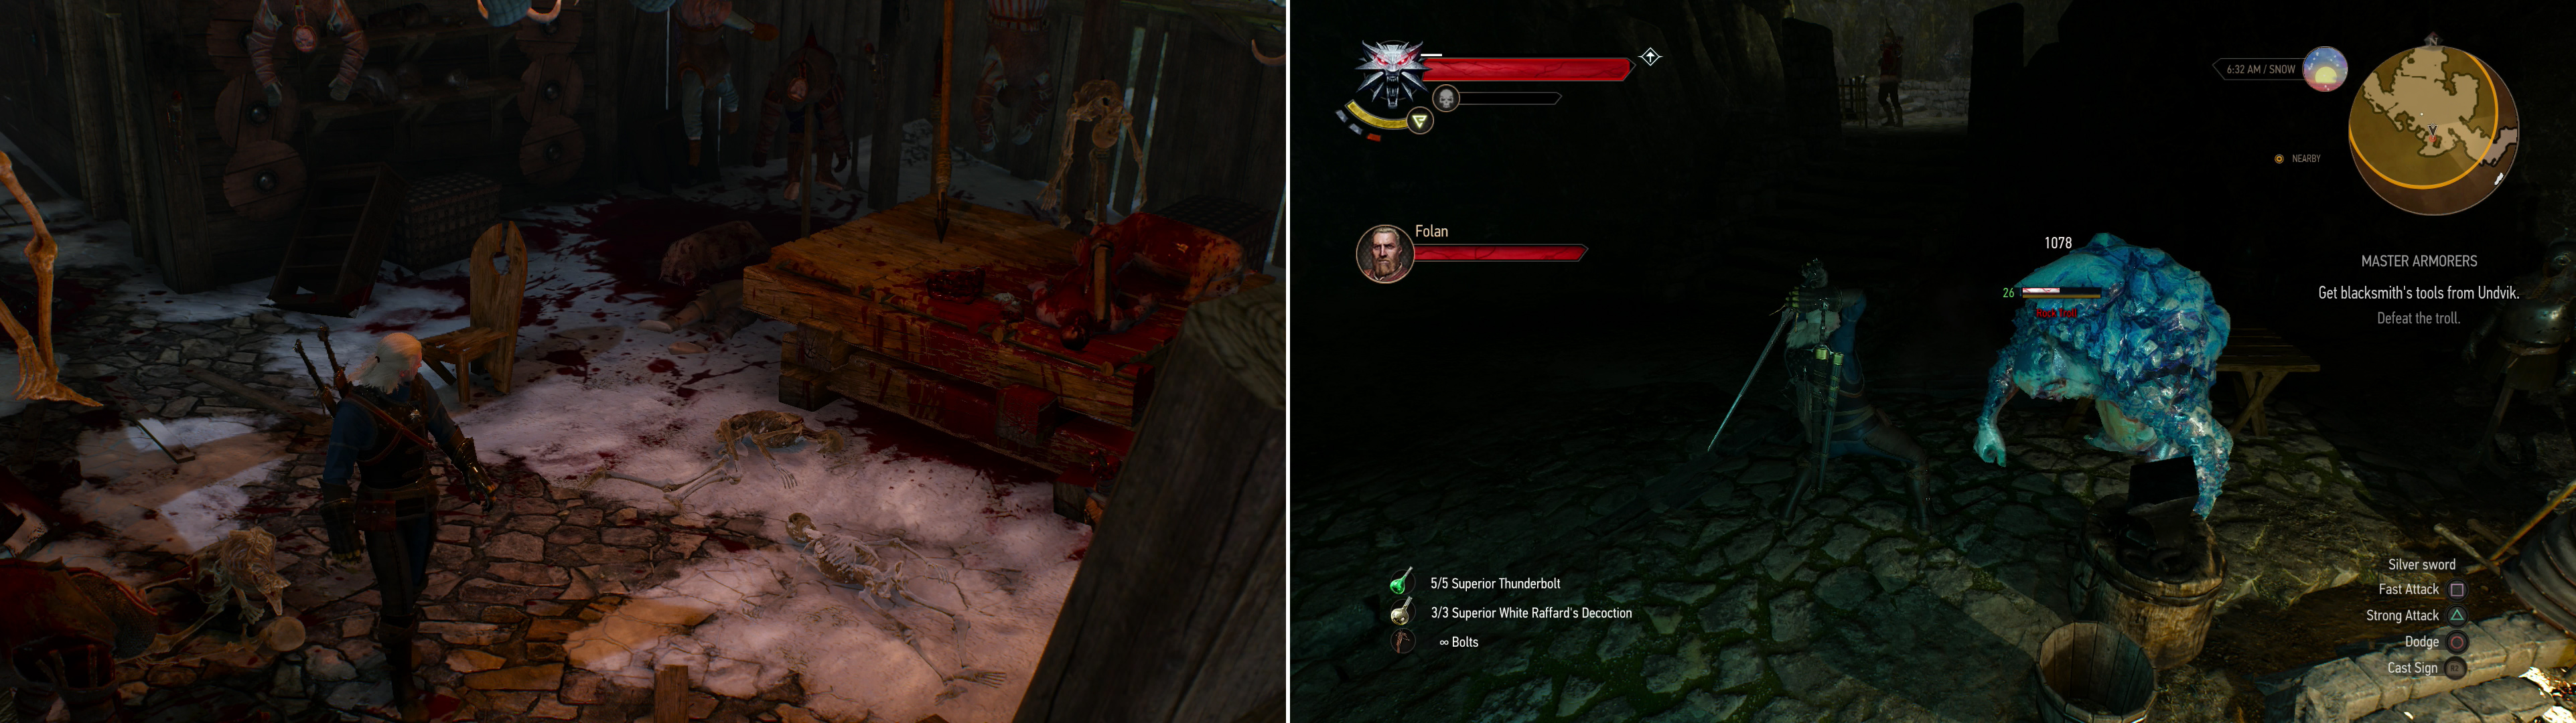 Geralt discovers the giant's grisly pantry (left). Make s short diversion and slay the Rock Troll that guards the smithing tools Fergus wants (right).